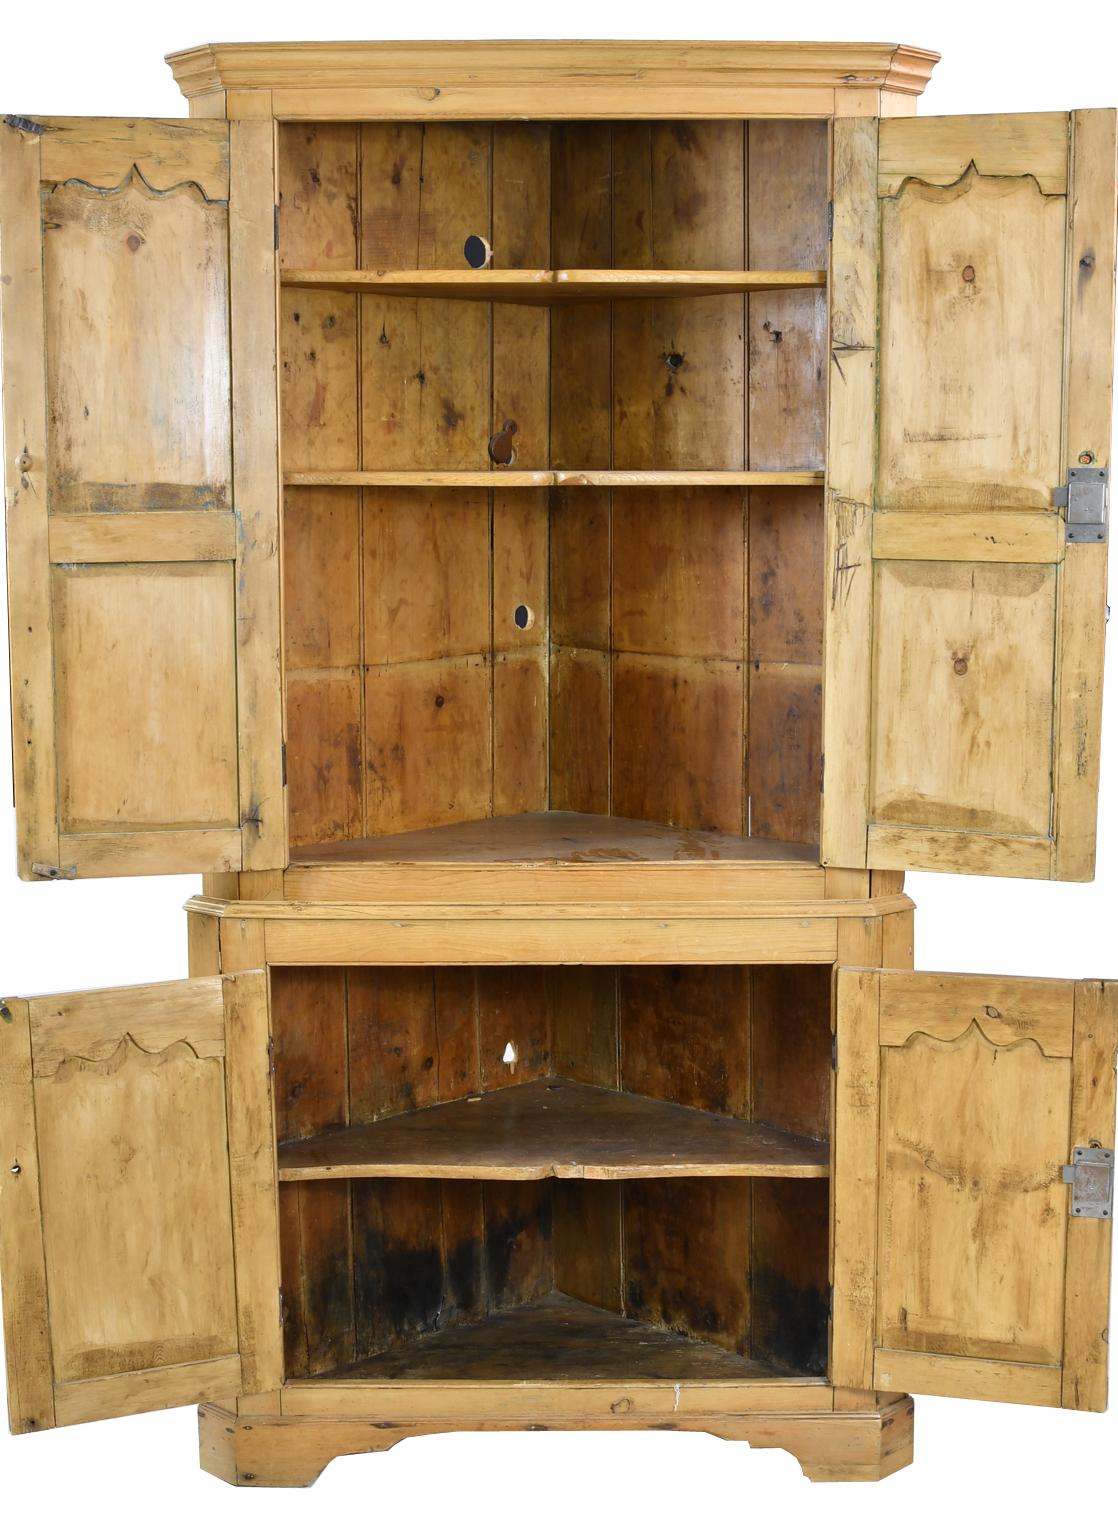 A charming English country corner cupboard in light, honey-colored pine with chamfered corners, four doors with recessed panels & carved scalloped upper molding, and resting on bracket feet. Interior of cabinets offers a total of three shelves,